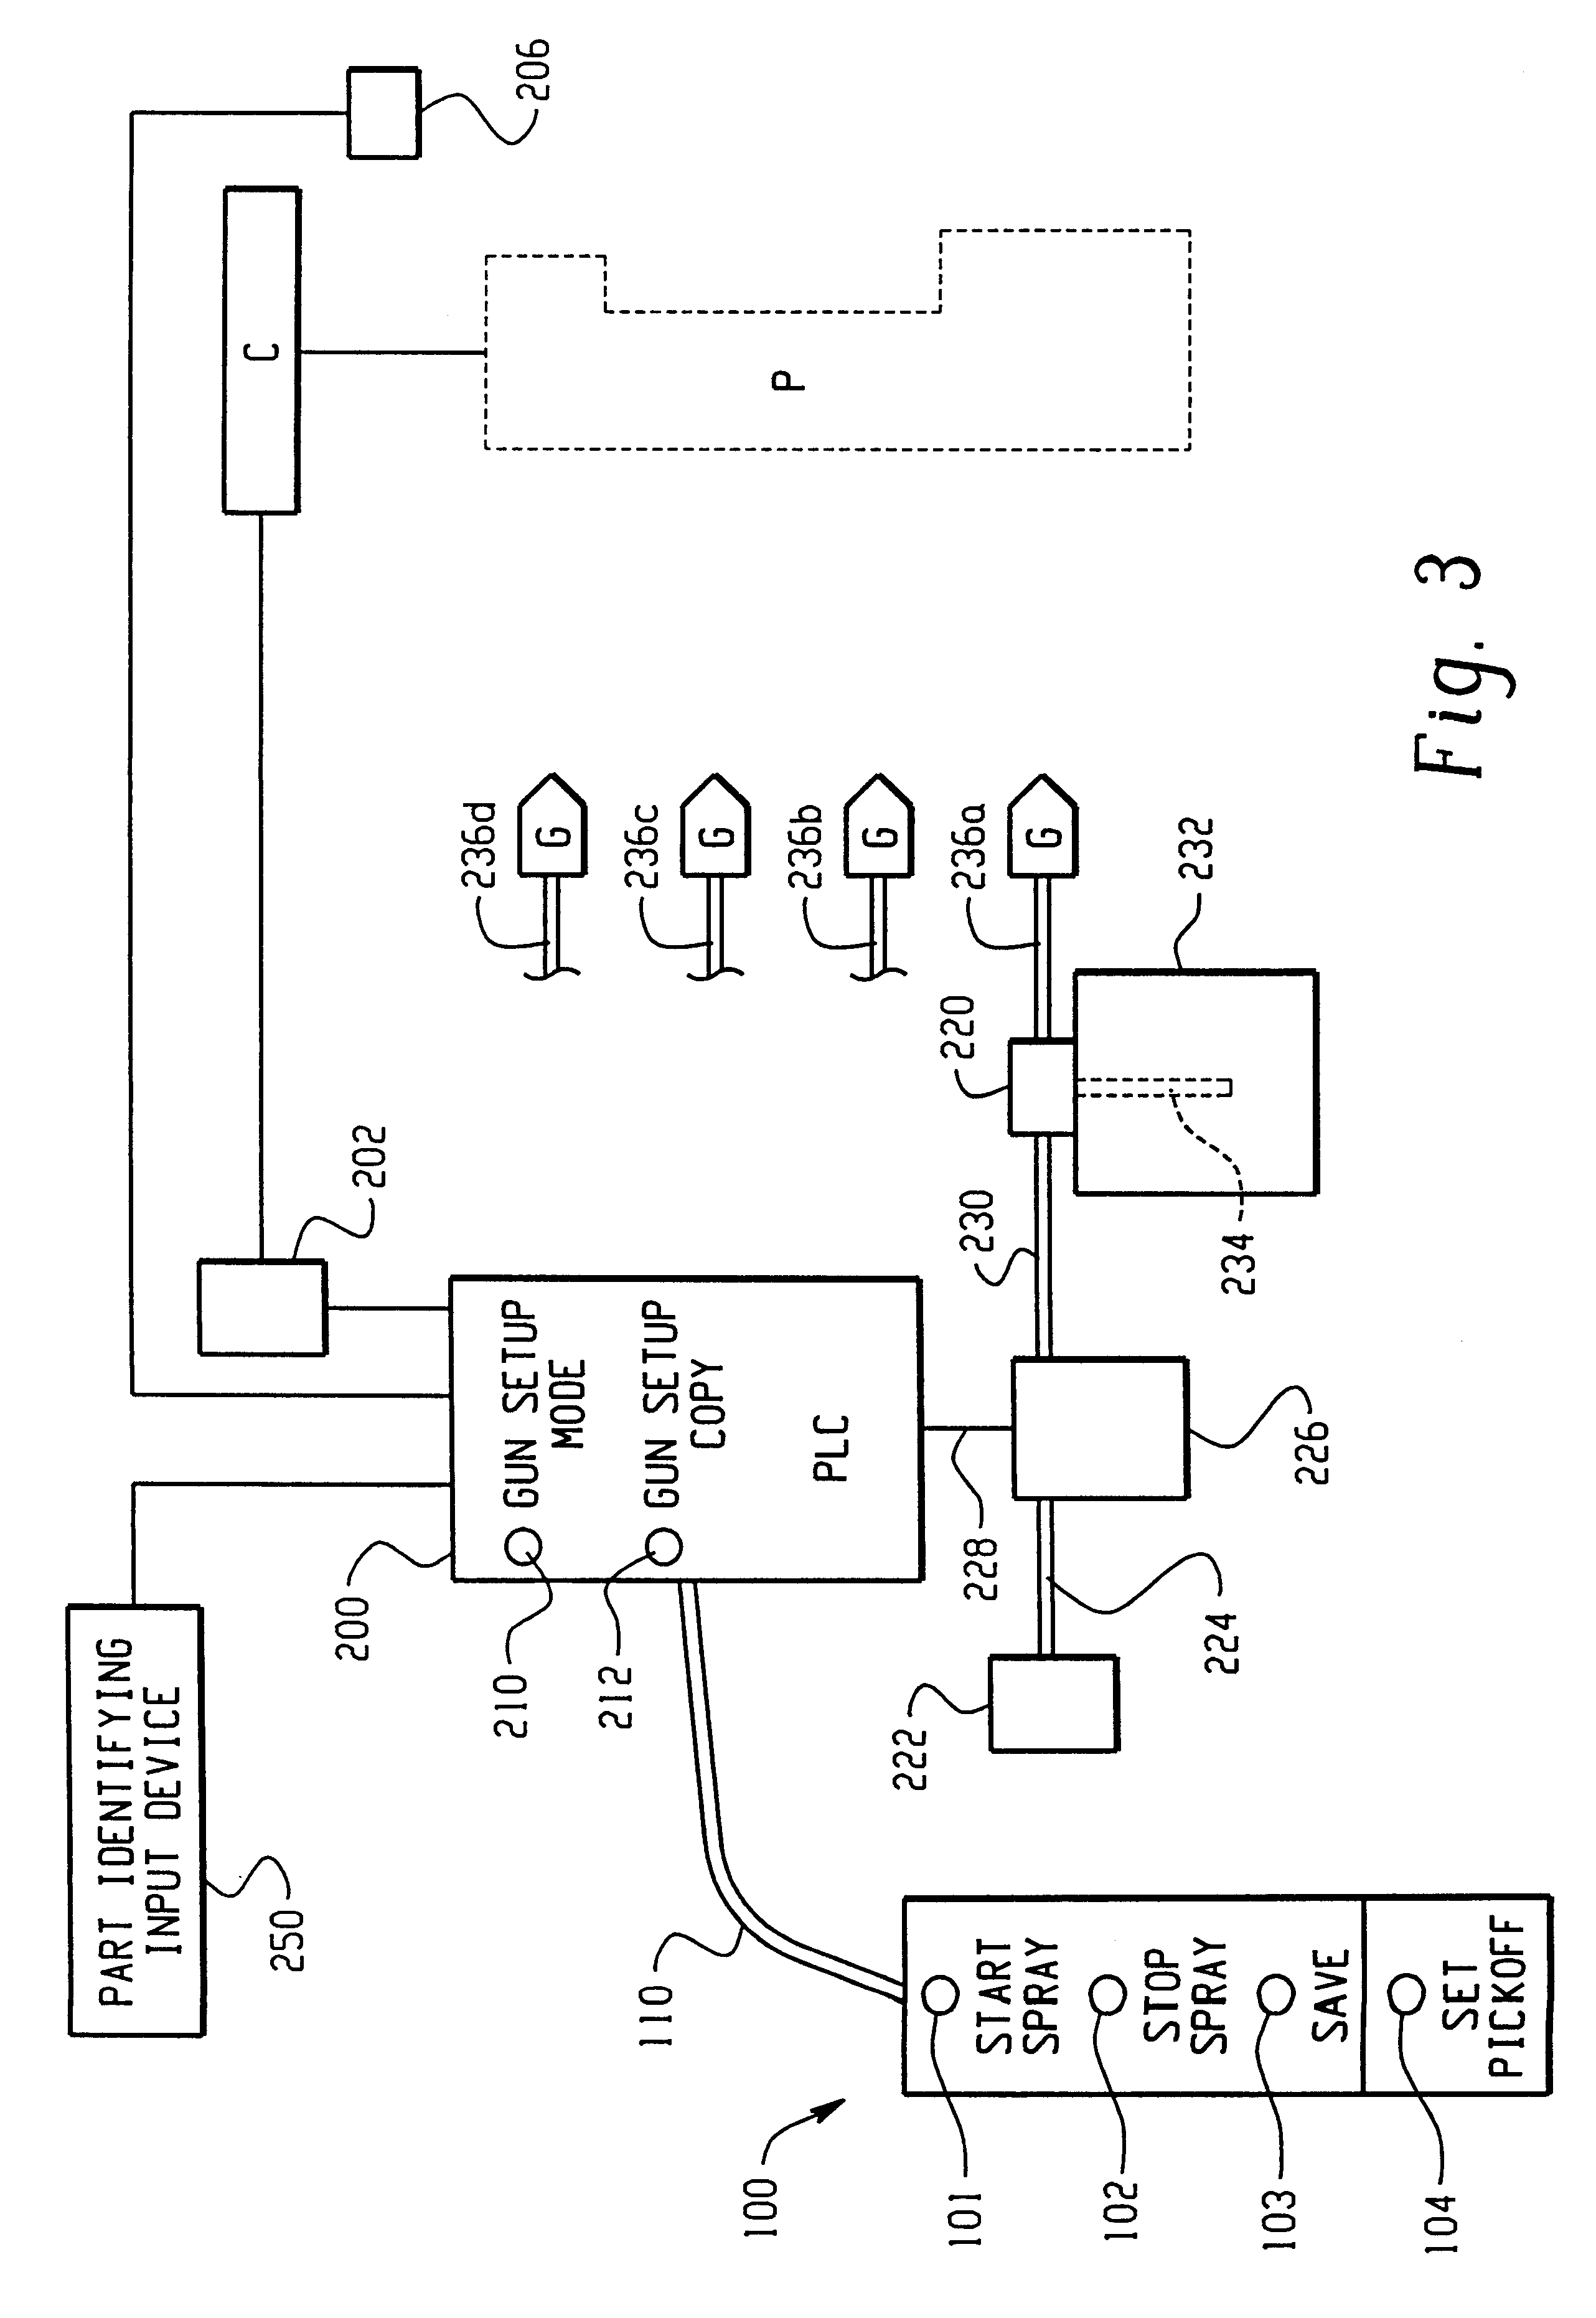 Systems for setting automatic gun triggering parameters in automated spray coating systems